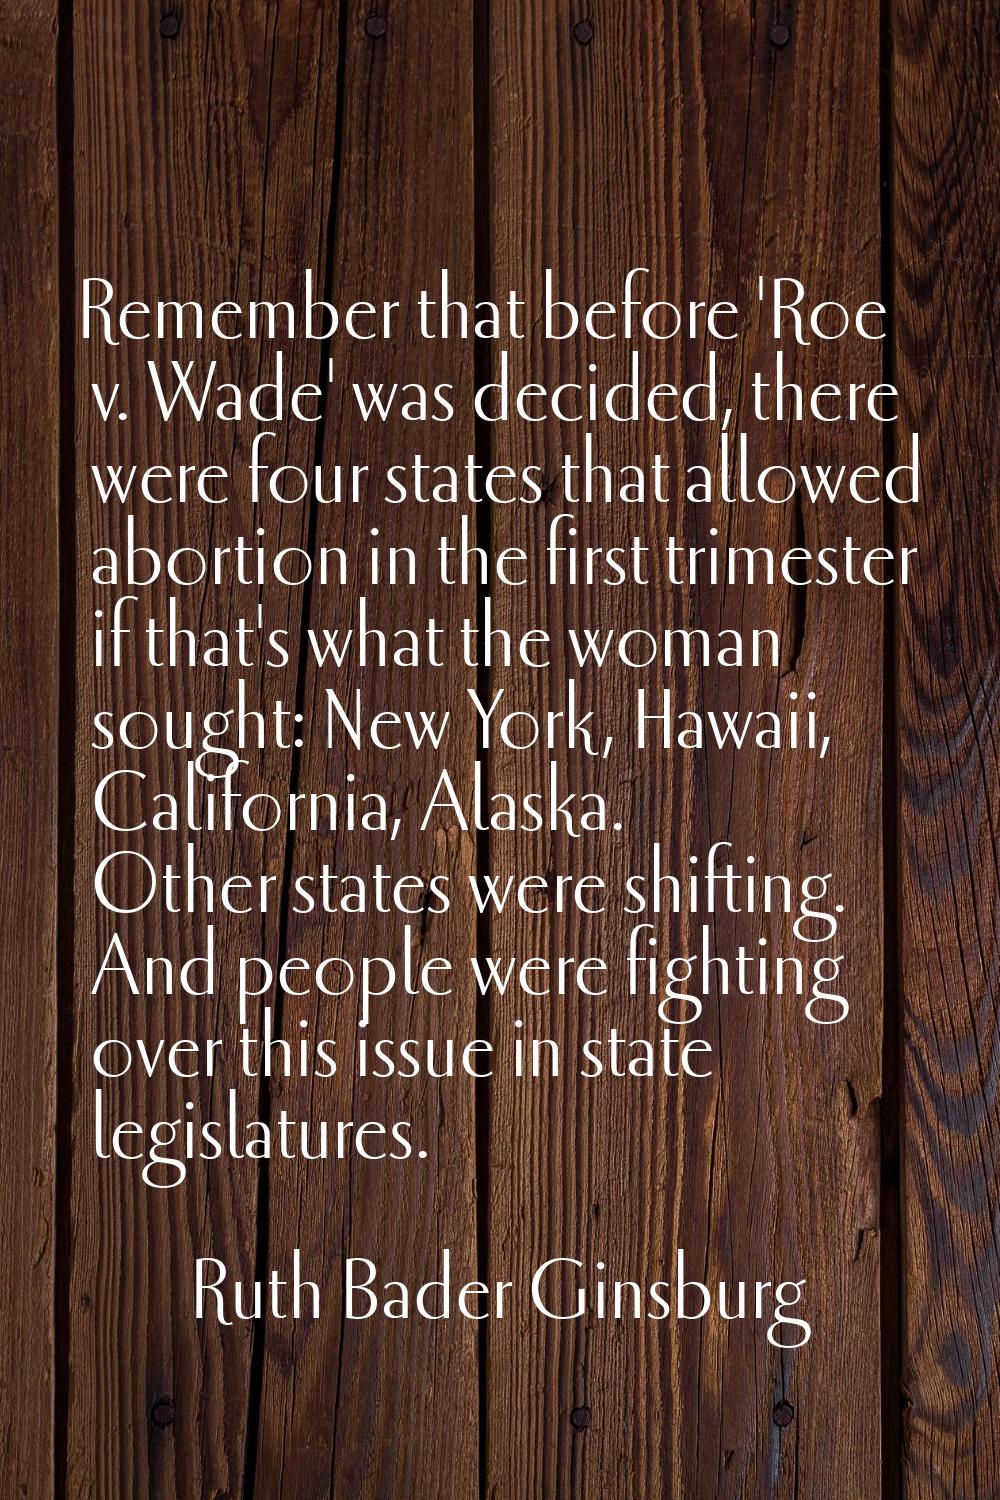 Remember that before 'Roe v. Wade' was decided, there were four states that allowed abortion in the